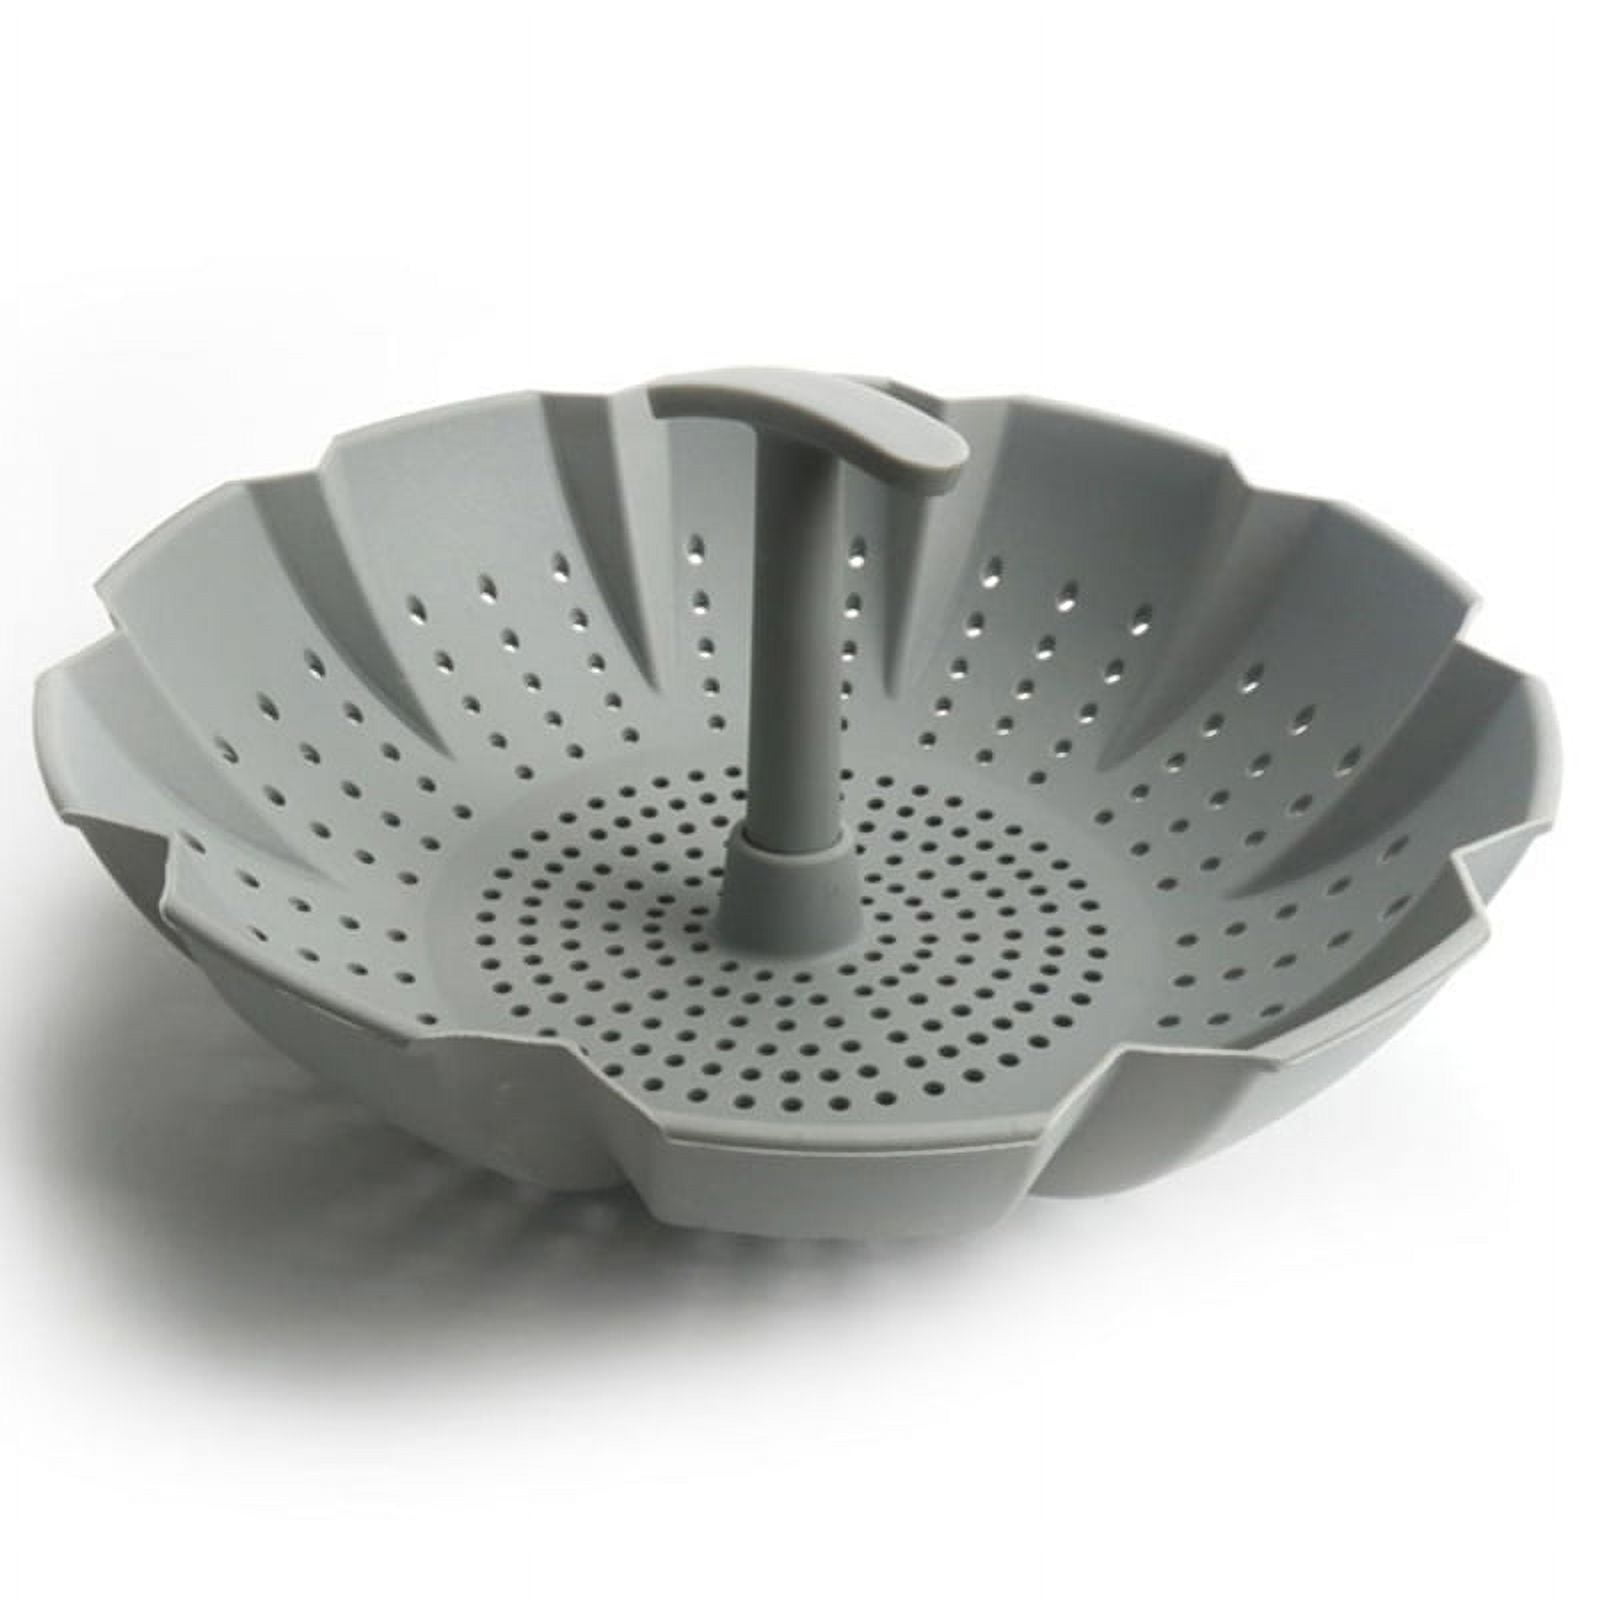 1pc Silicone Steamer Basket Air Holes Design With Feet And Handle For Pan  Reusable Silicone Easy To Clean And Store Food Grade Material Steamer